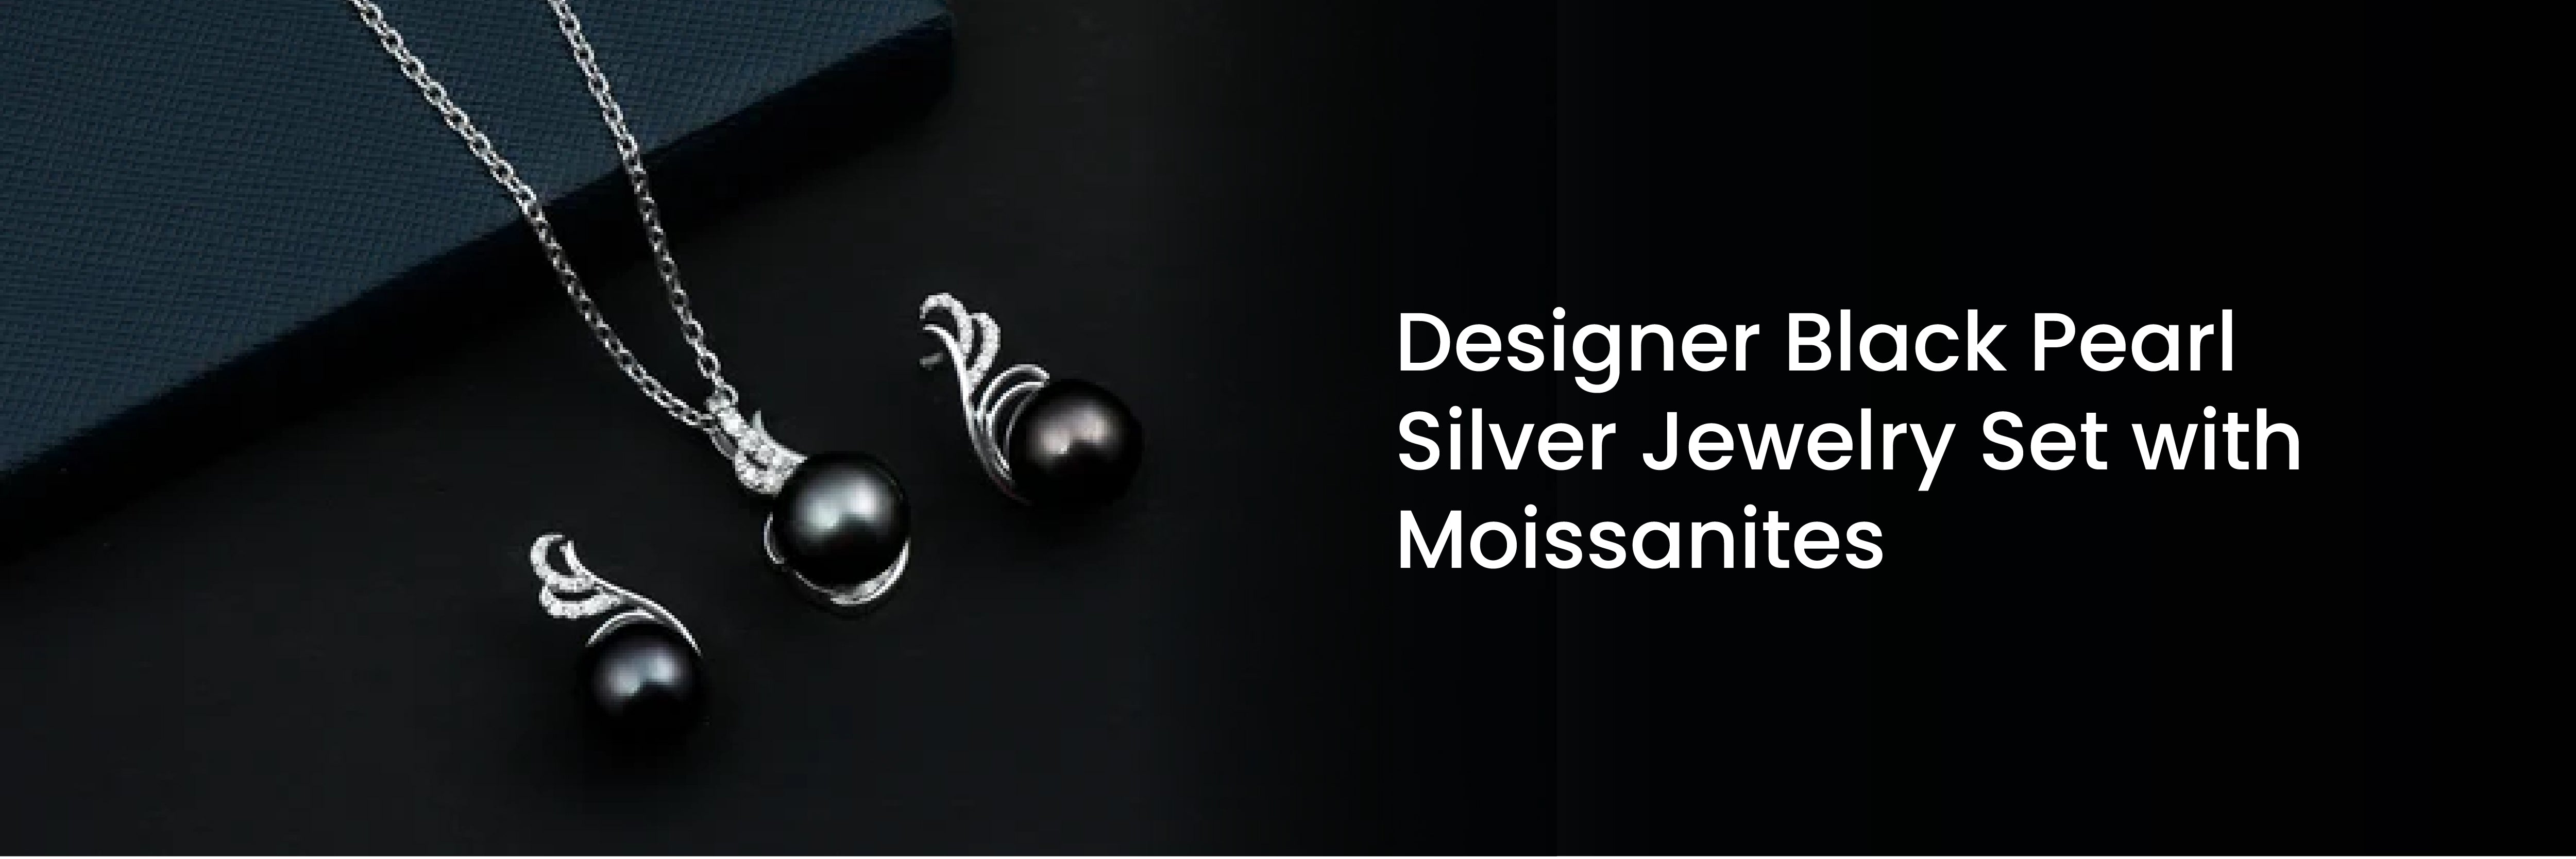 Designer Black Pearl Silver Jewelry Set with Moissanites